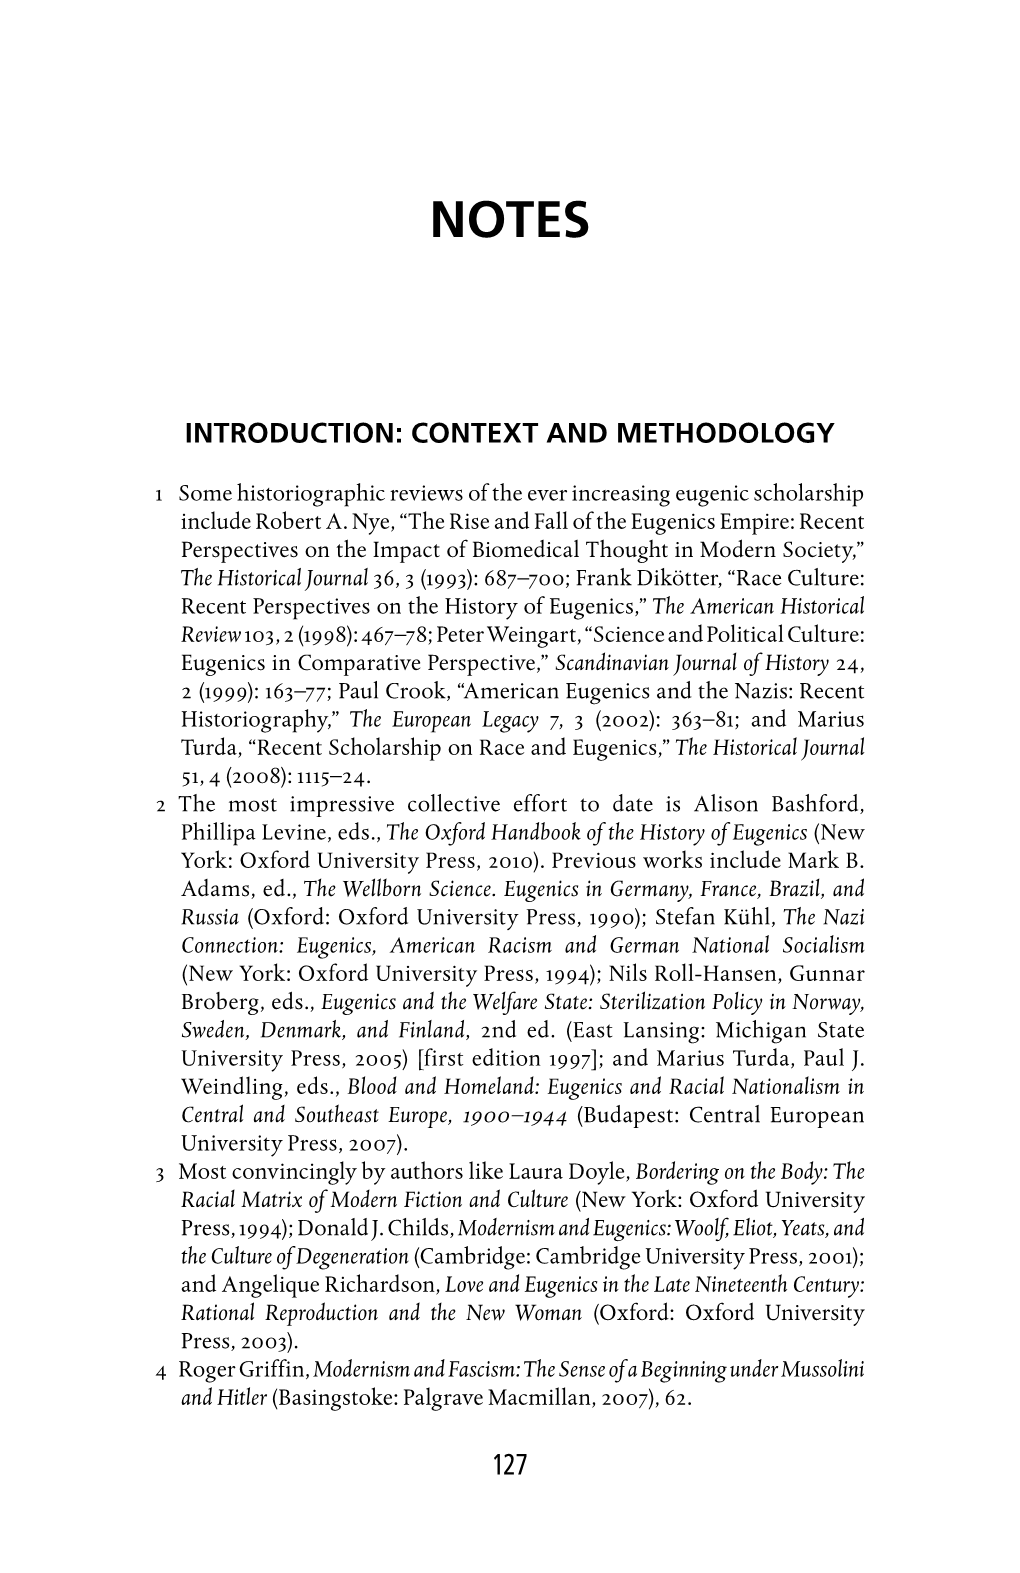 Introduction: Context and Methodology